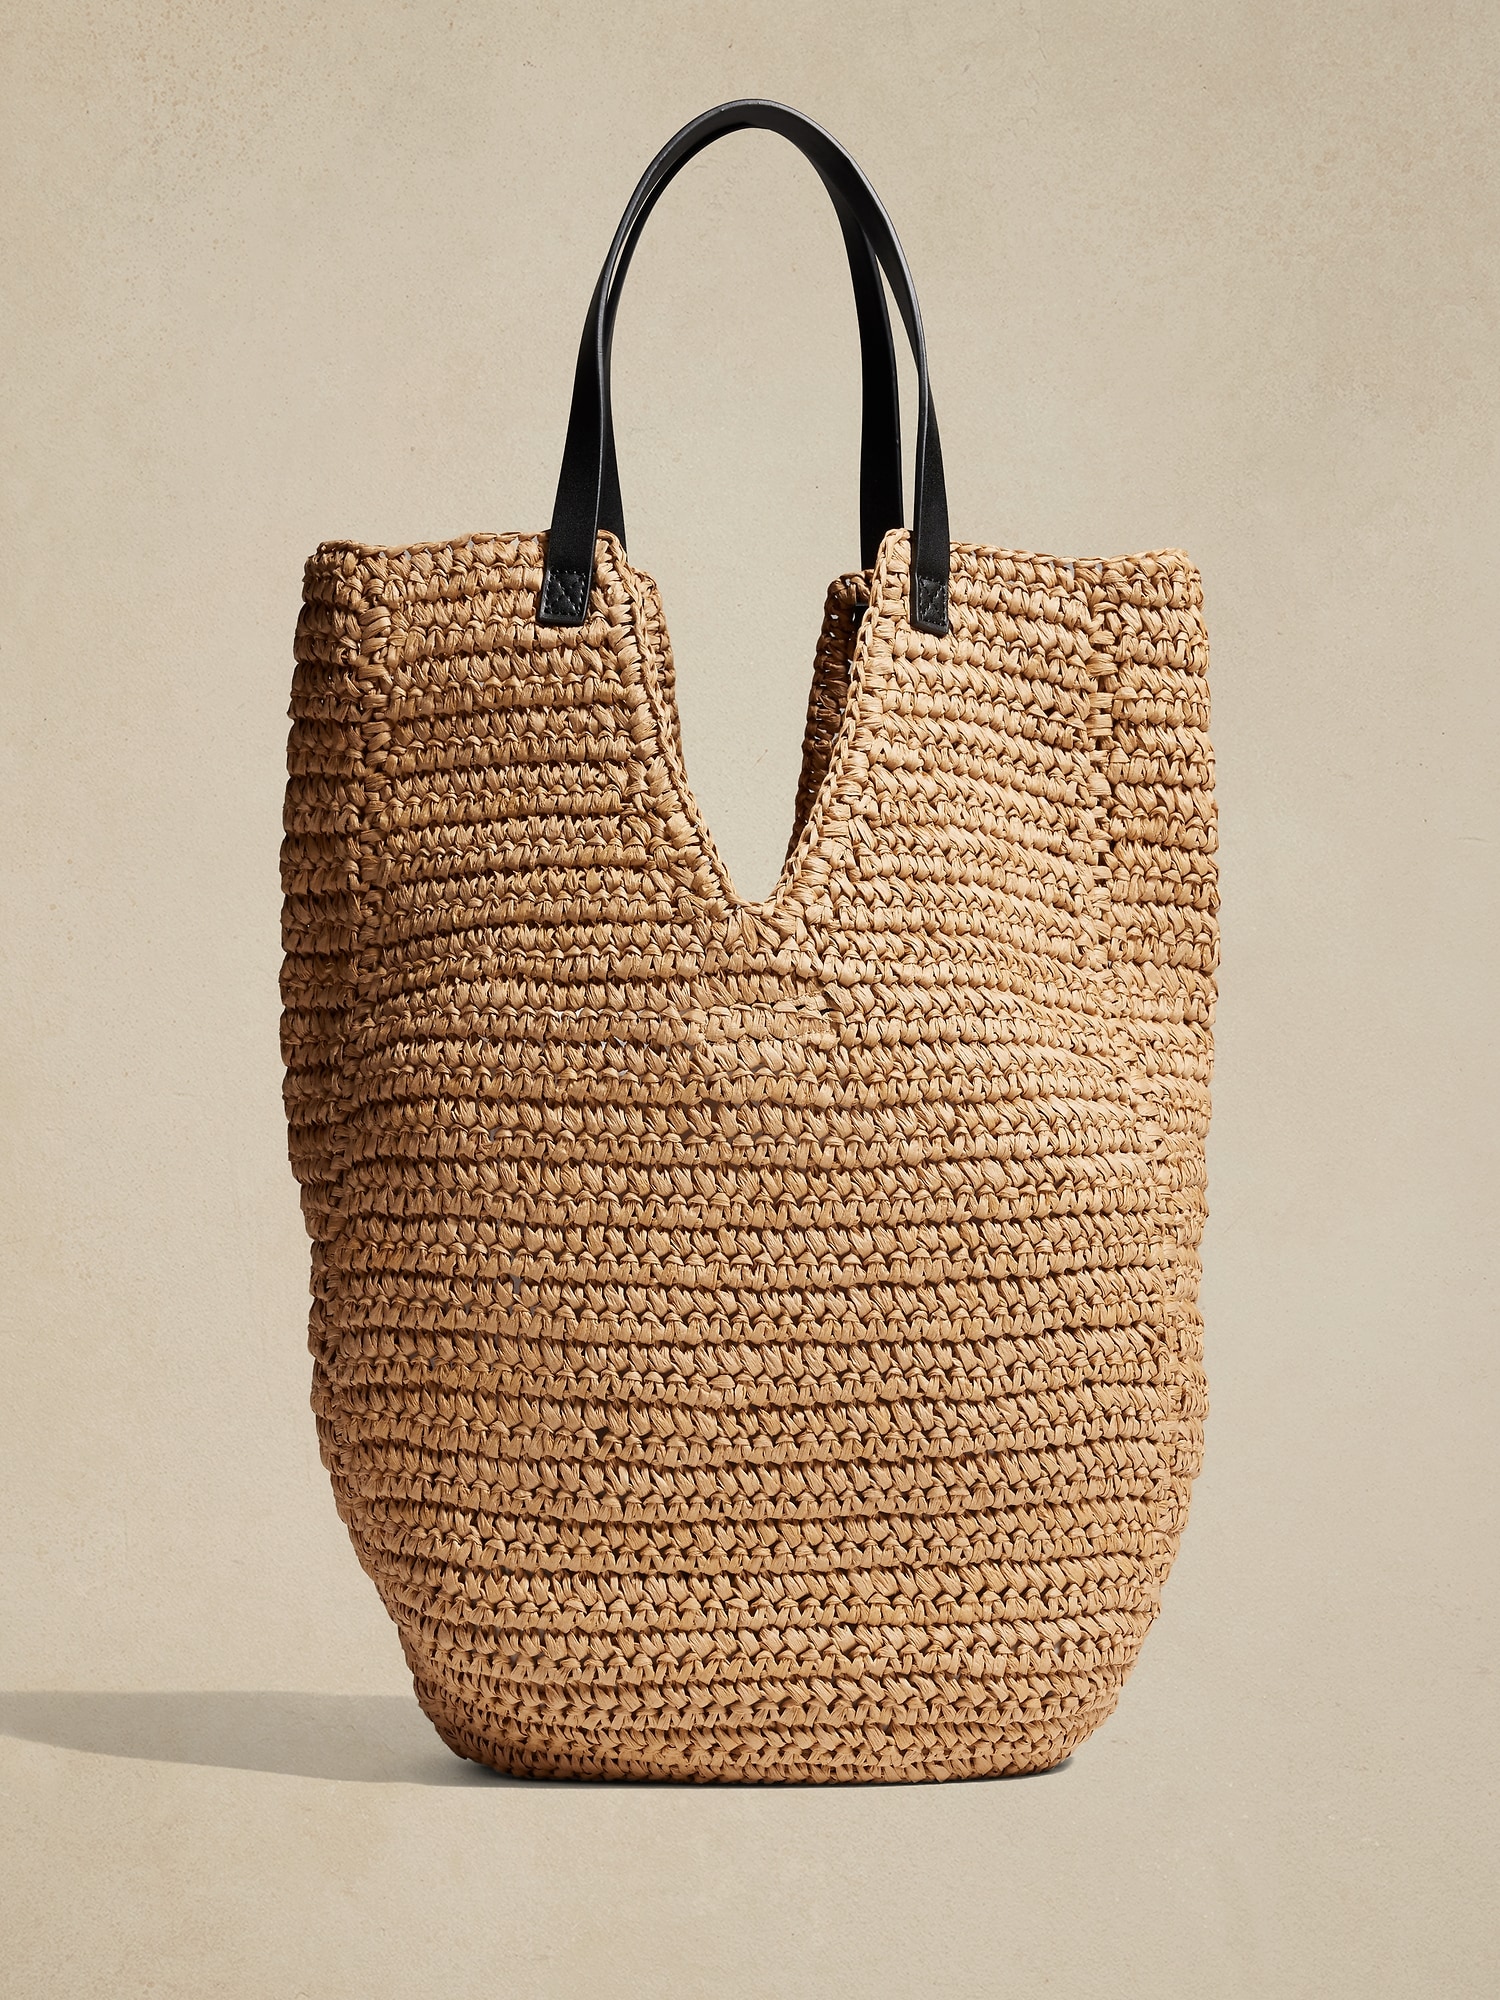 Large Capacity Woven Straw Tote Bag For Women Ideal For Shopping, Vacation,  And Travel Stylish And Functional Handbag With Armpit Montgomery Straps And  Purse Design 230515 From Copyluxurybag, $45.76 | DHgate.Com